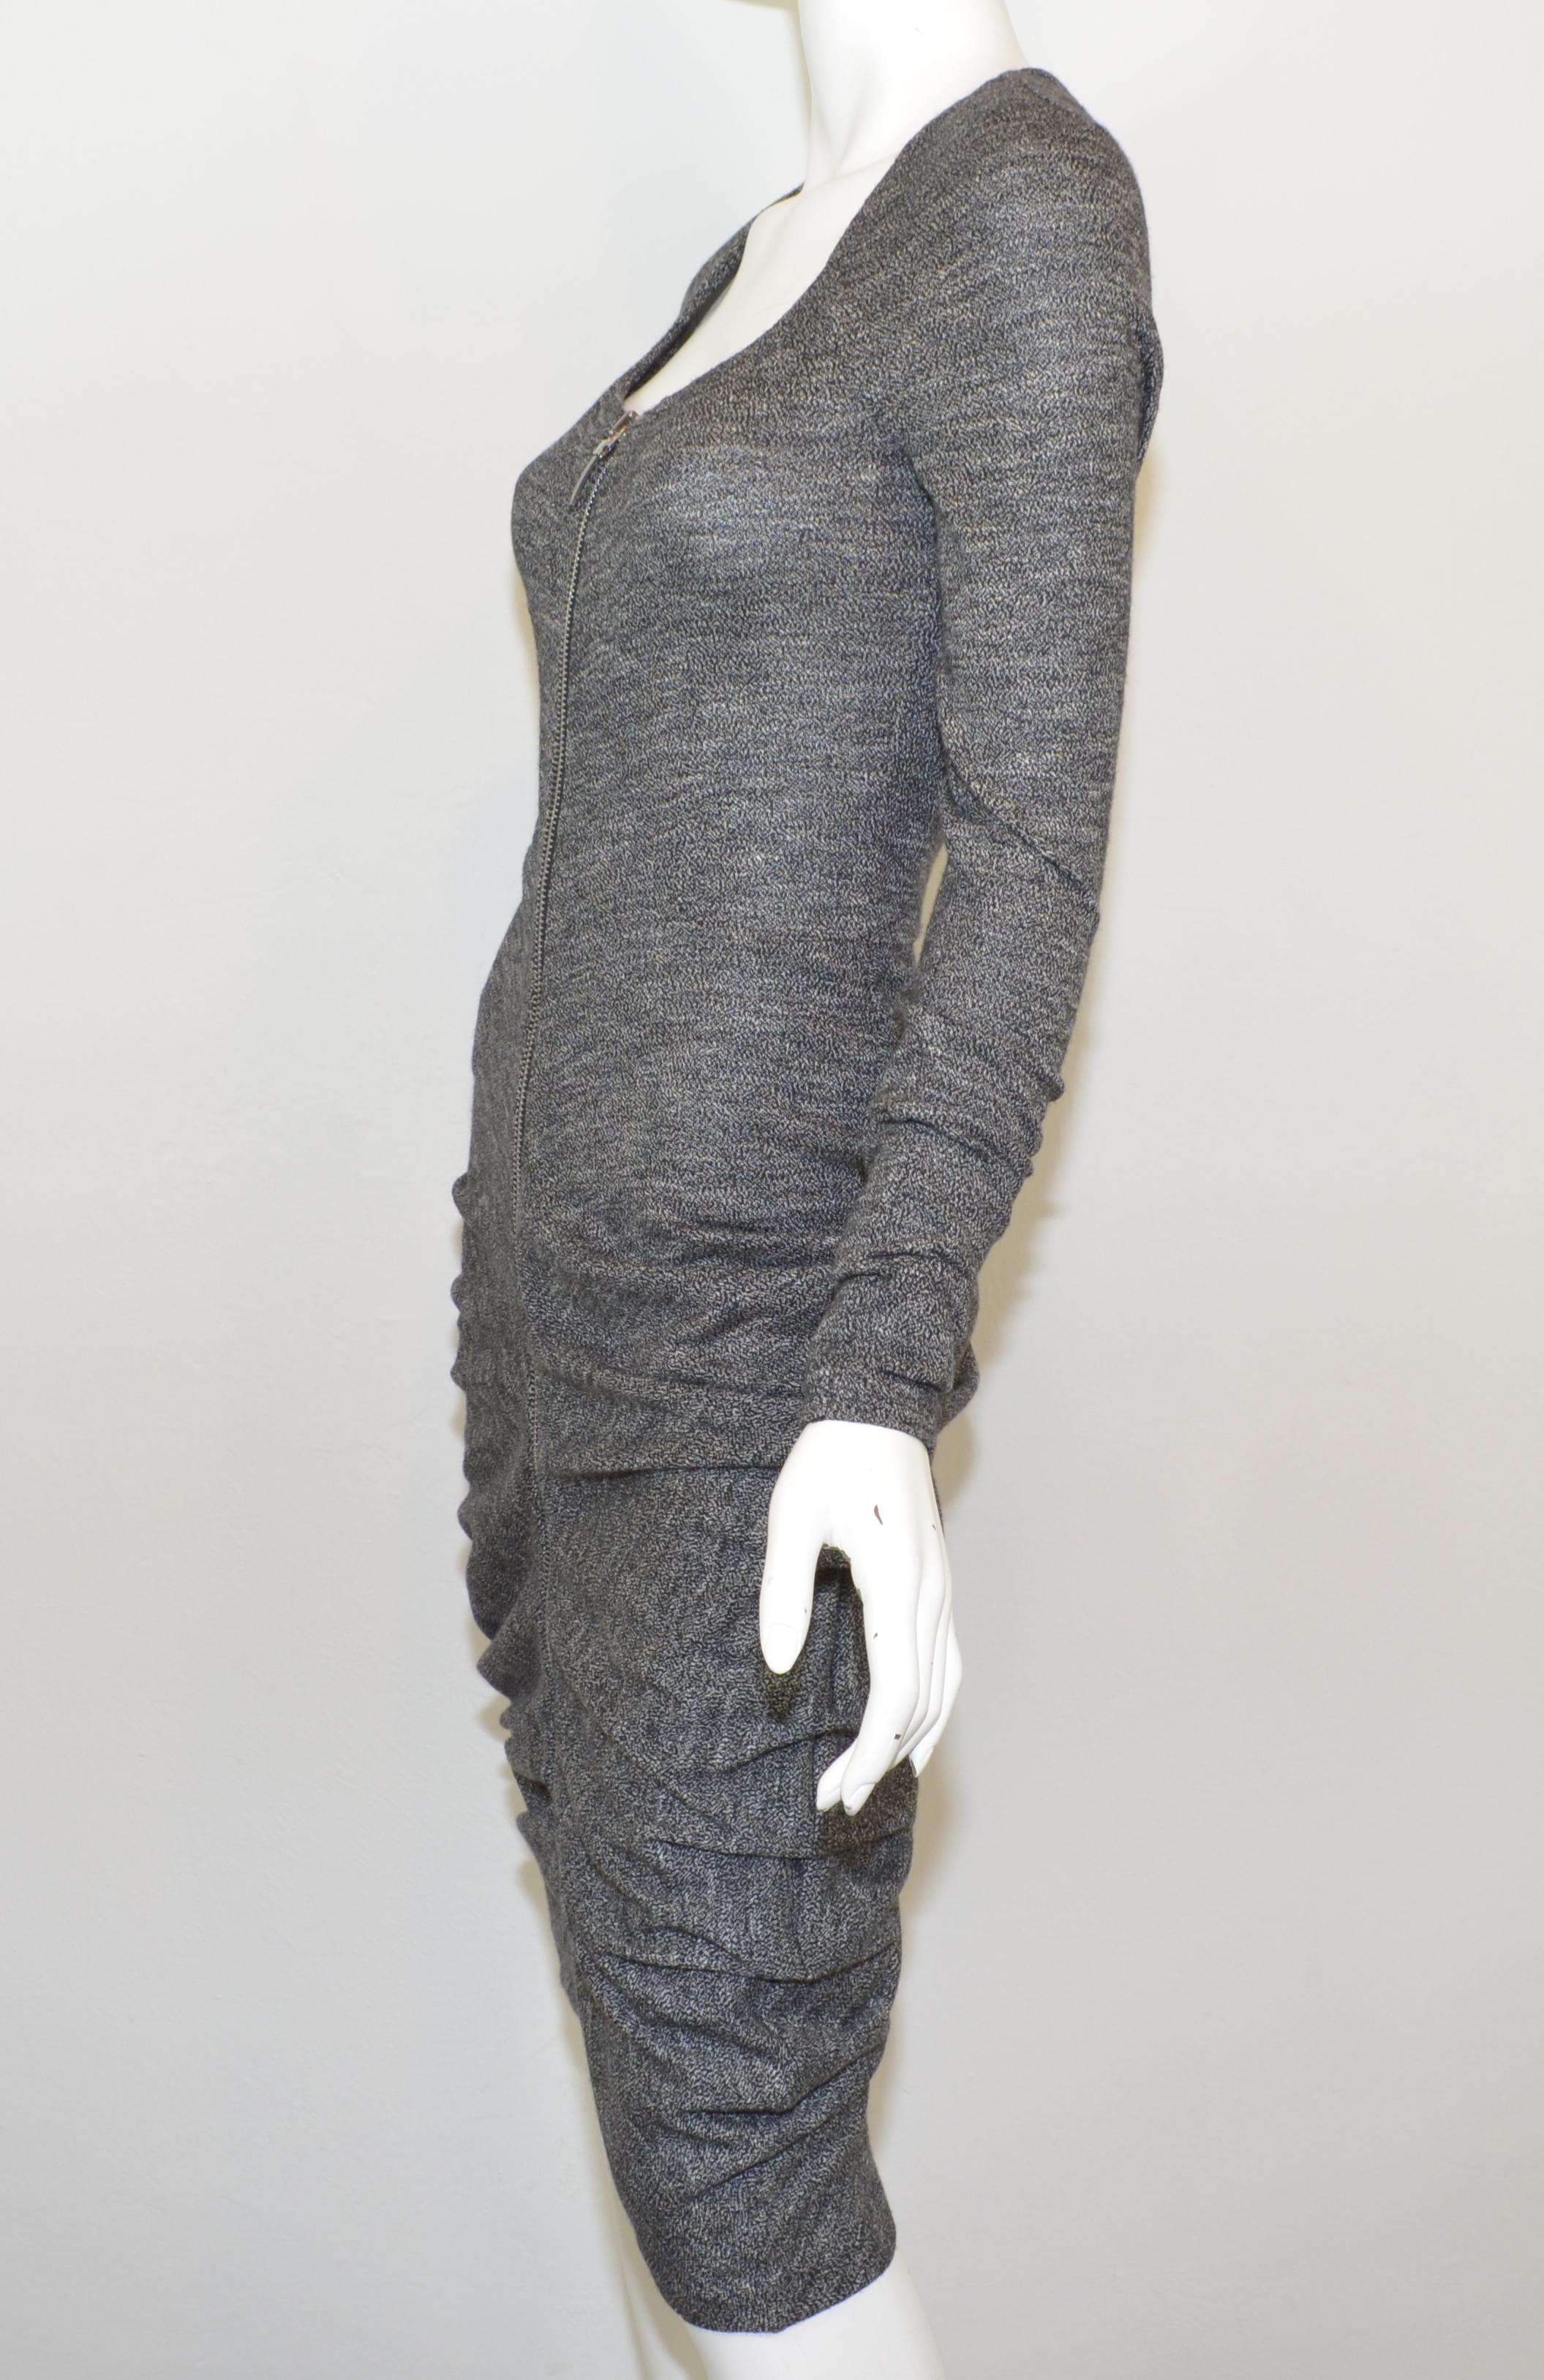 Alexander McQueen dress is featured in a gray, black, and white marled knit with a full zippered front closure and ruching along the bodice. Dress is a size 38. 

Measurements:
Bust 28”
Waist 27”
Hips 30” (some room for stretch)
Sleeves 31”